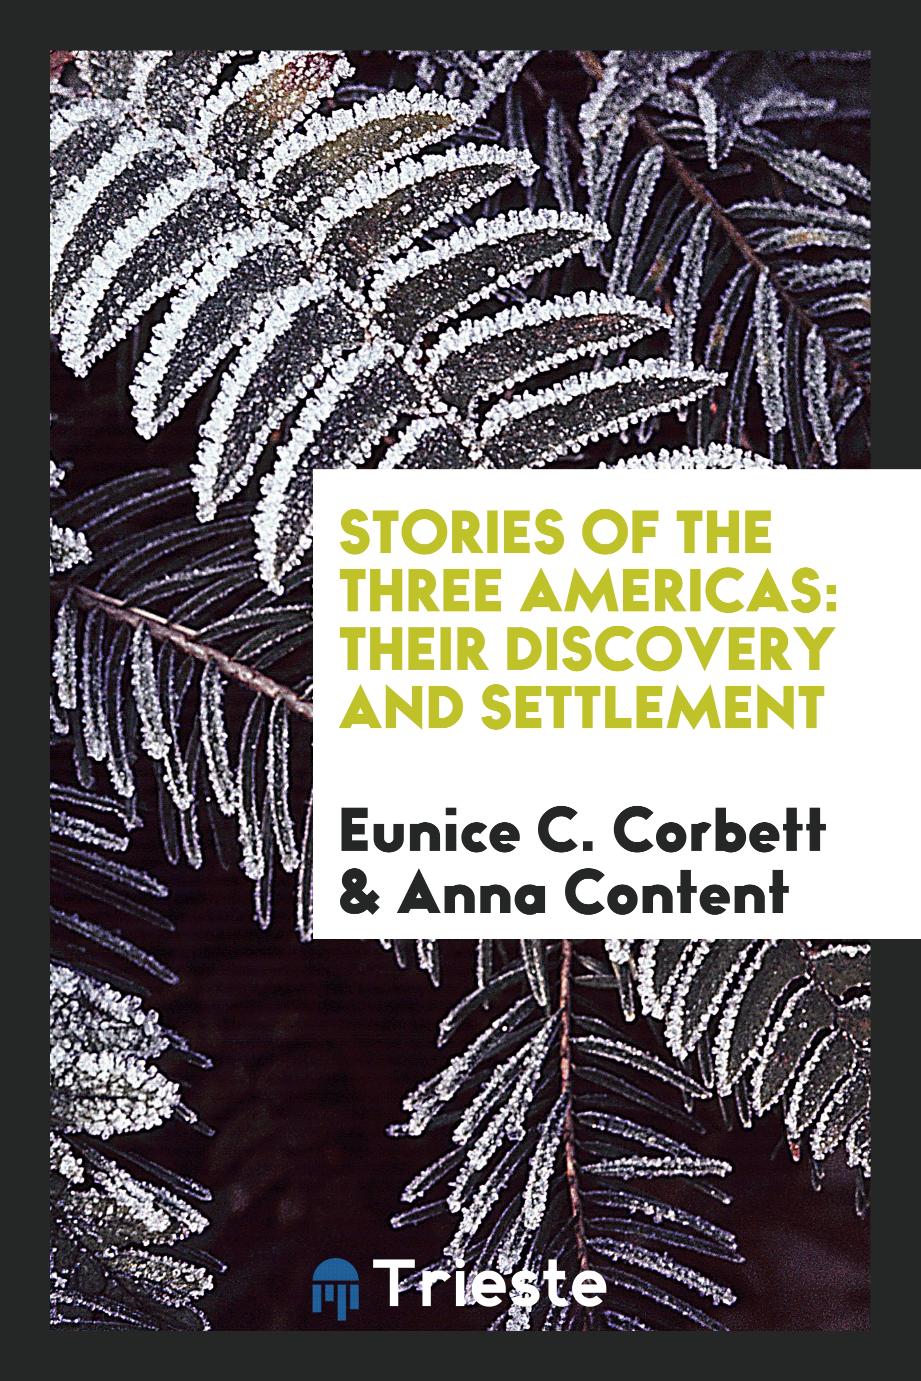 Stories of the Three Americas: Their Discovery and Settlement